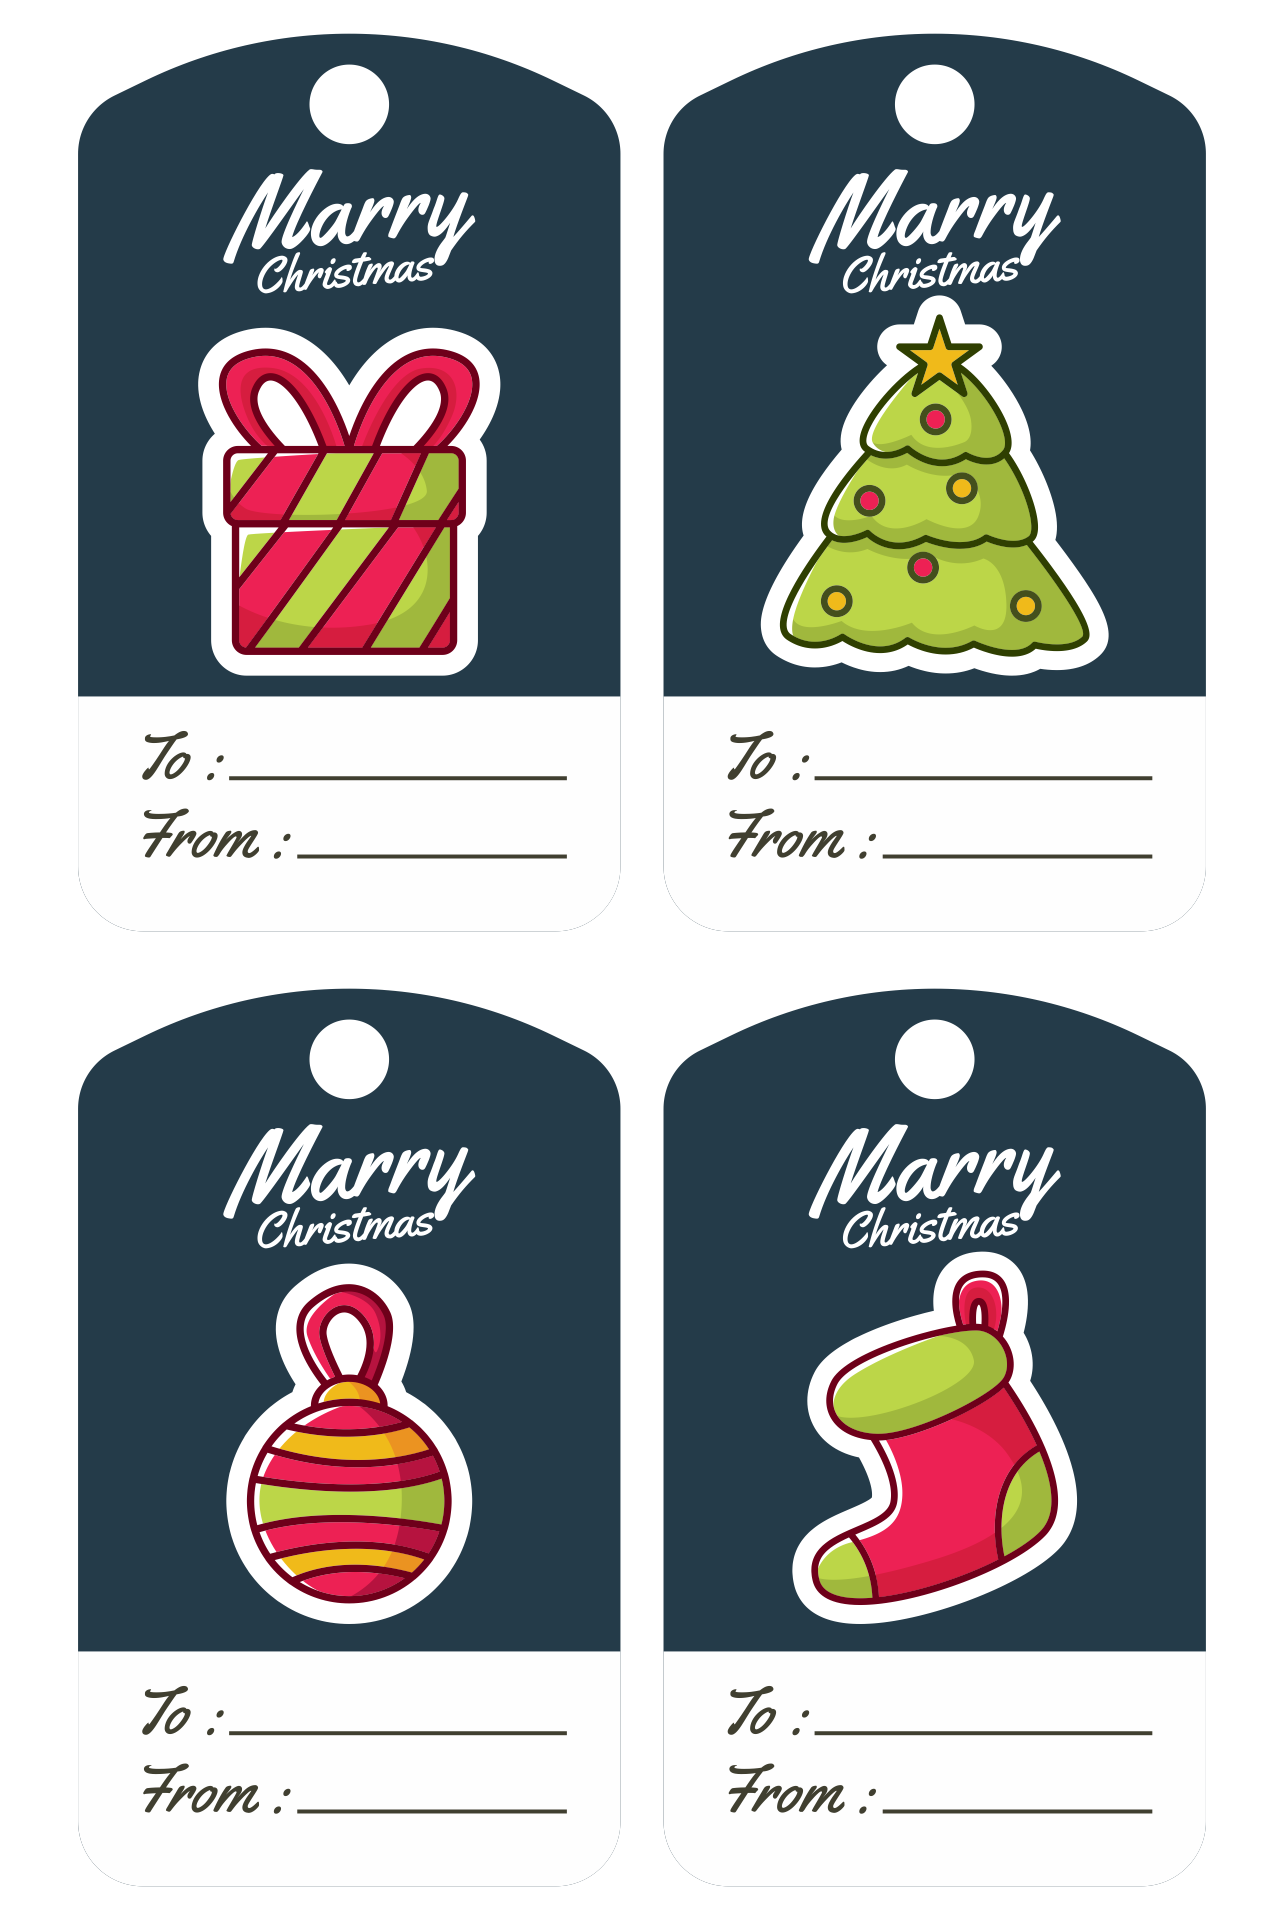 6-best-images-of-free-printable-christmas-label-templates-free-printable-christmas-labels